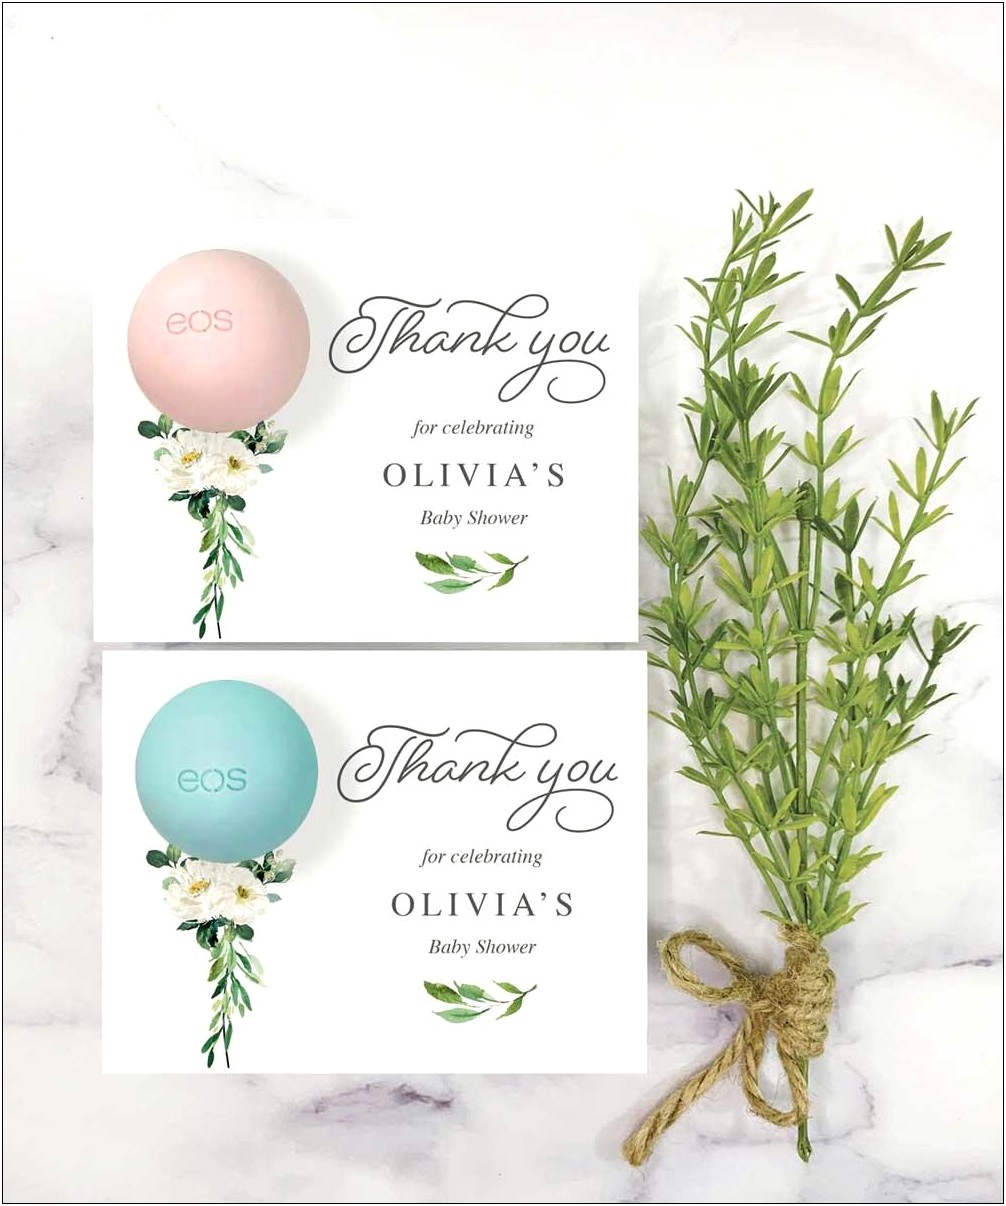 Eos Baby Shower Template Free Download